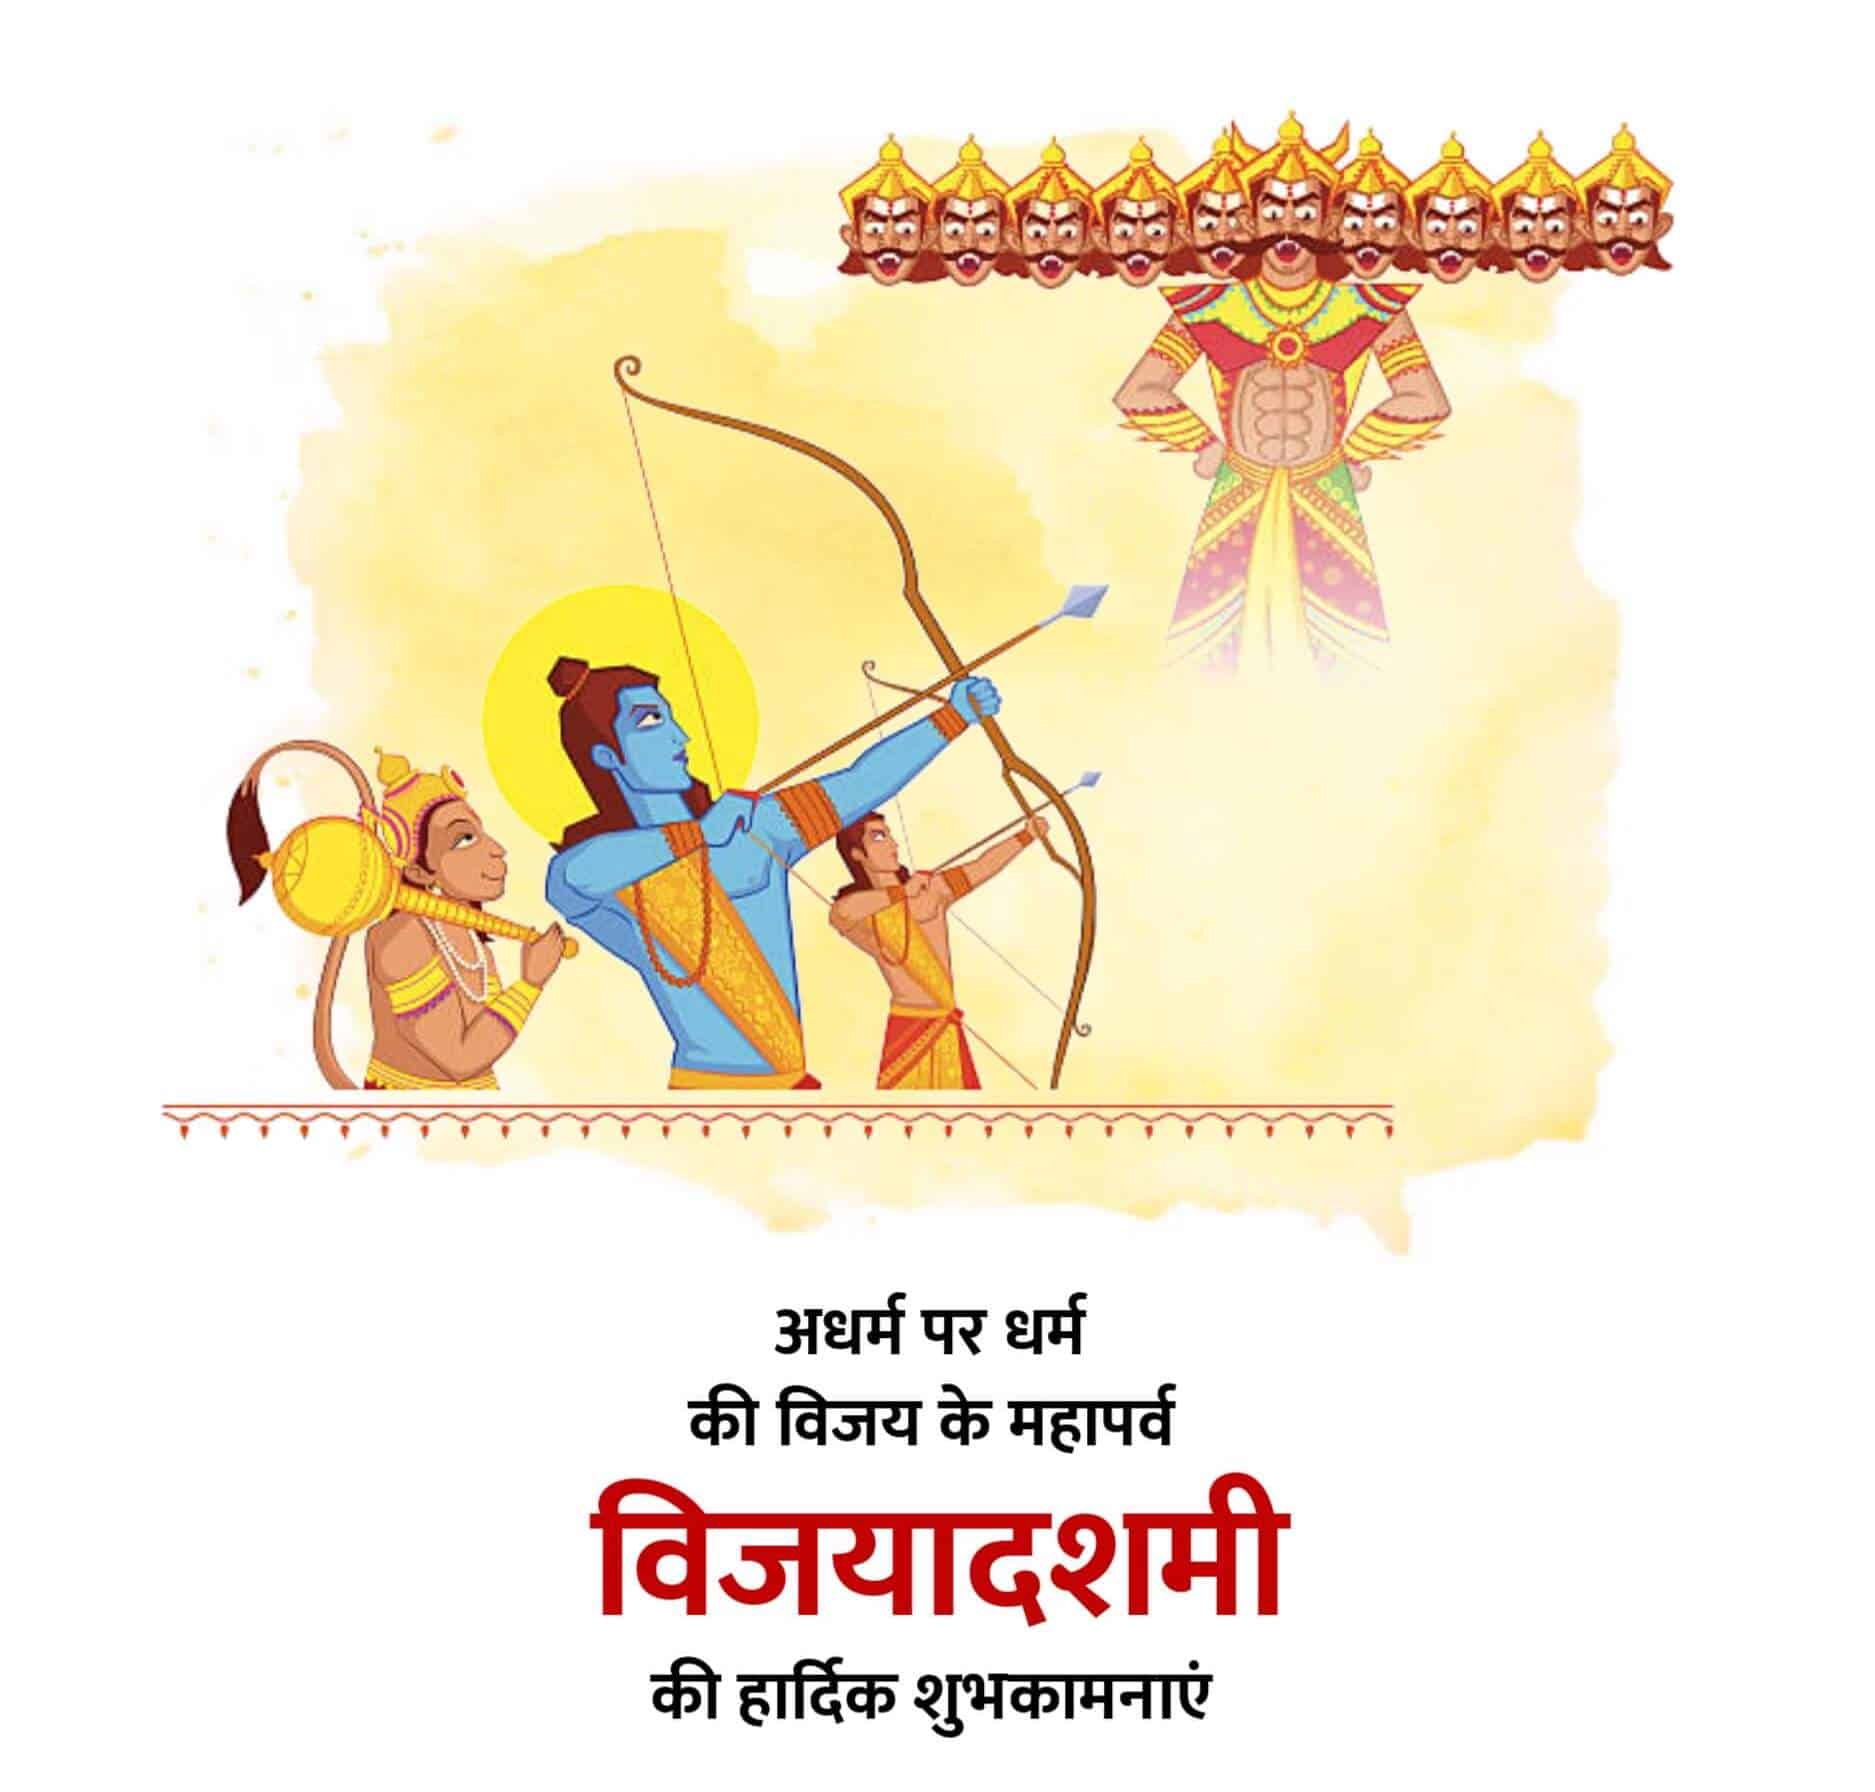 Happy Dussehra Images in Hindi